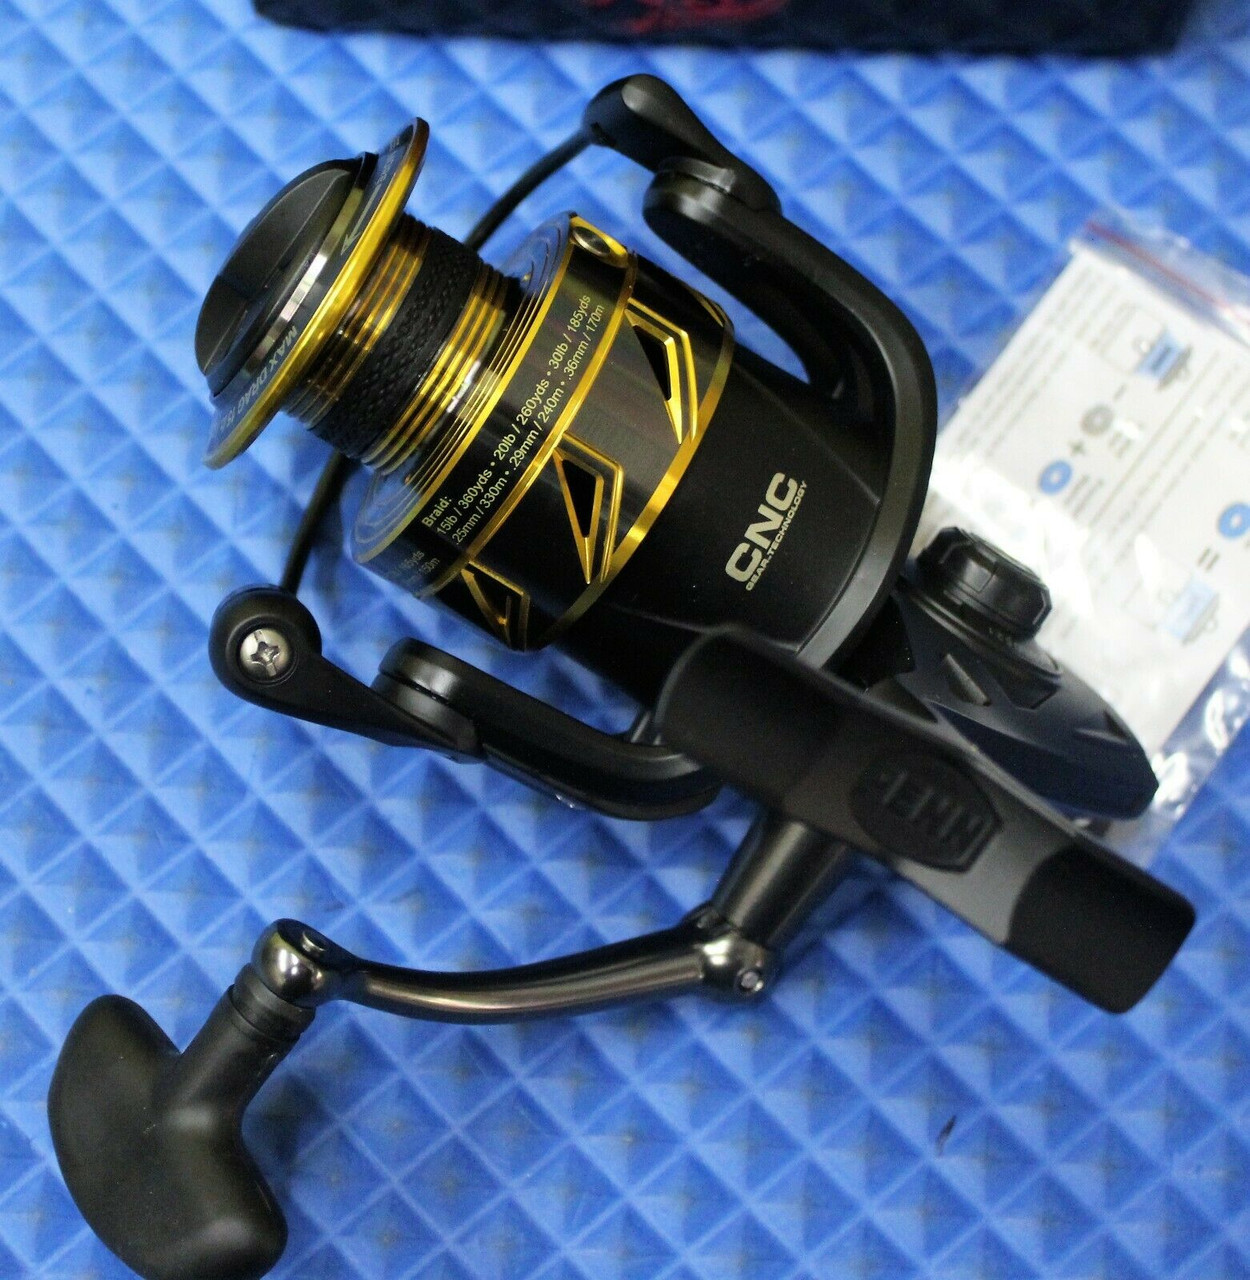 Two of my favourite reels for saltwater fishing. Penn Battle 3